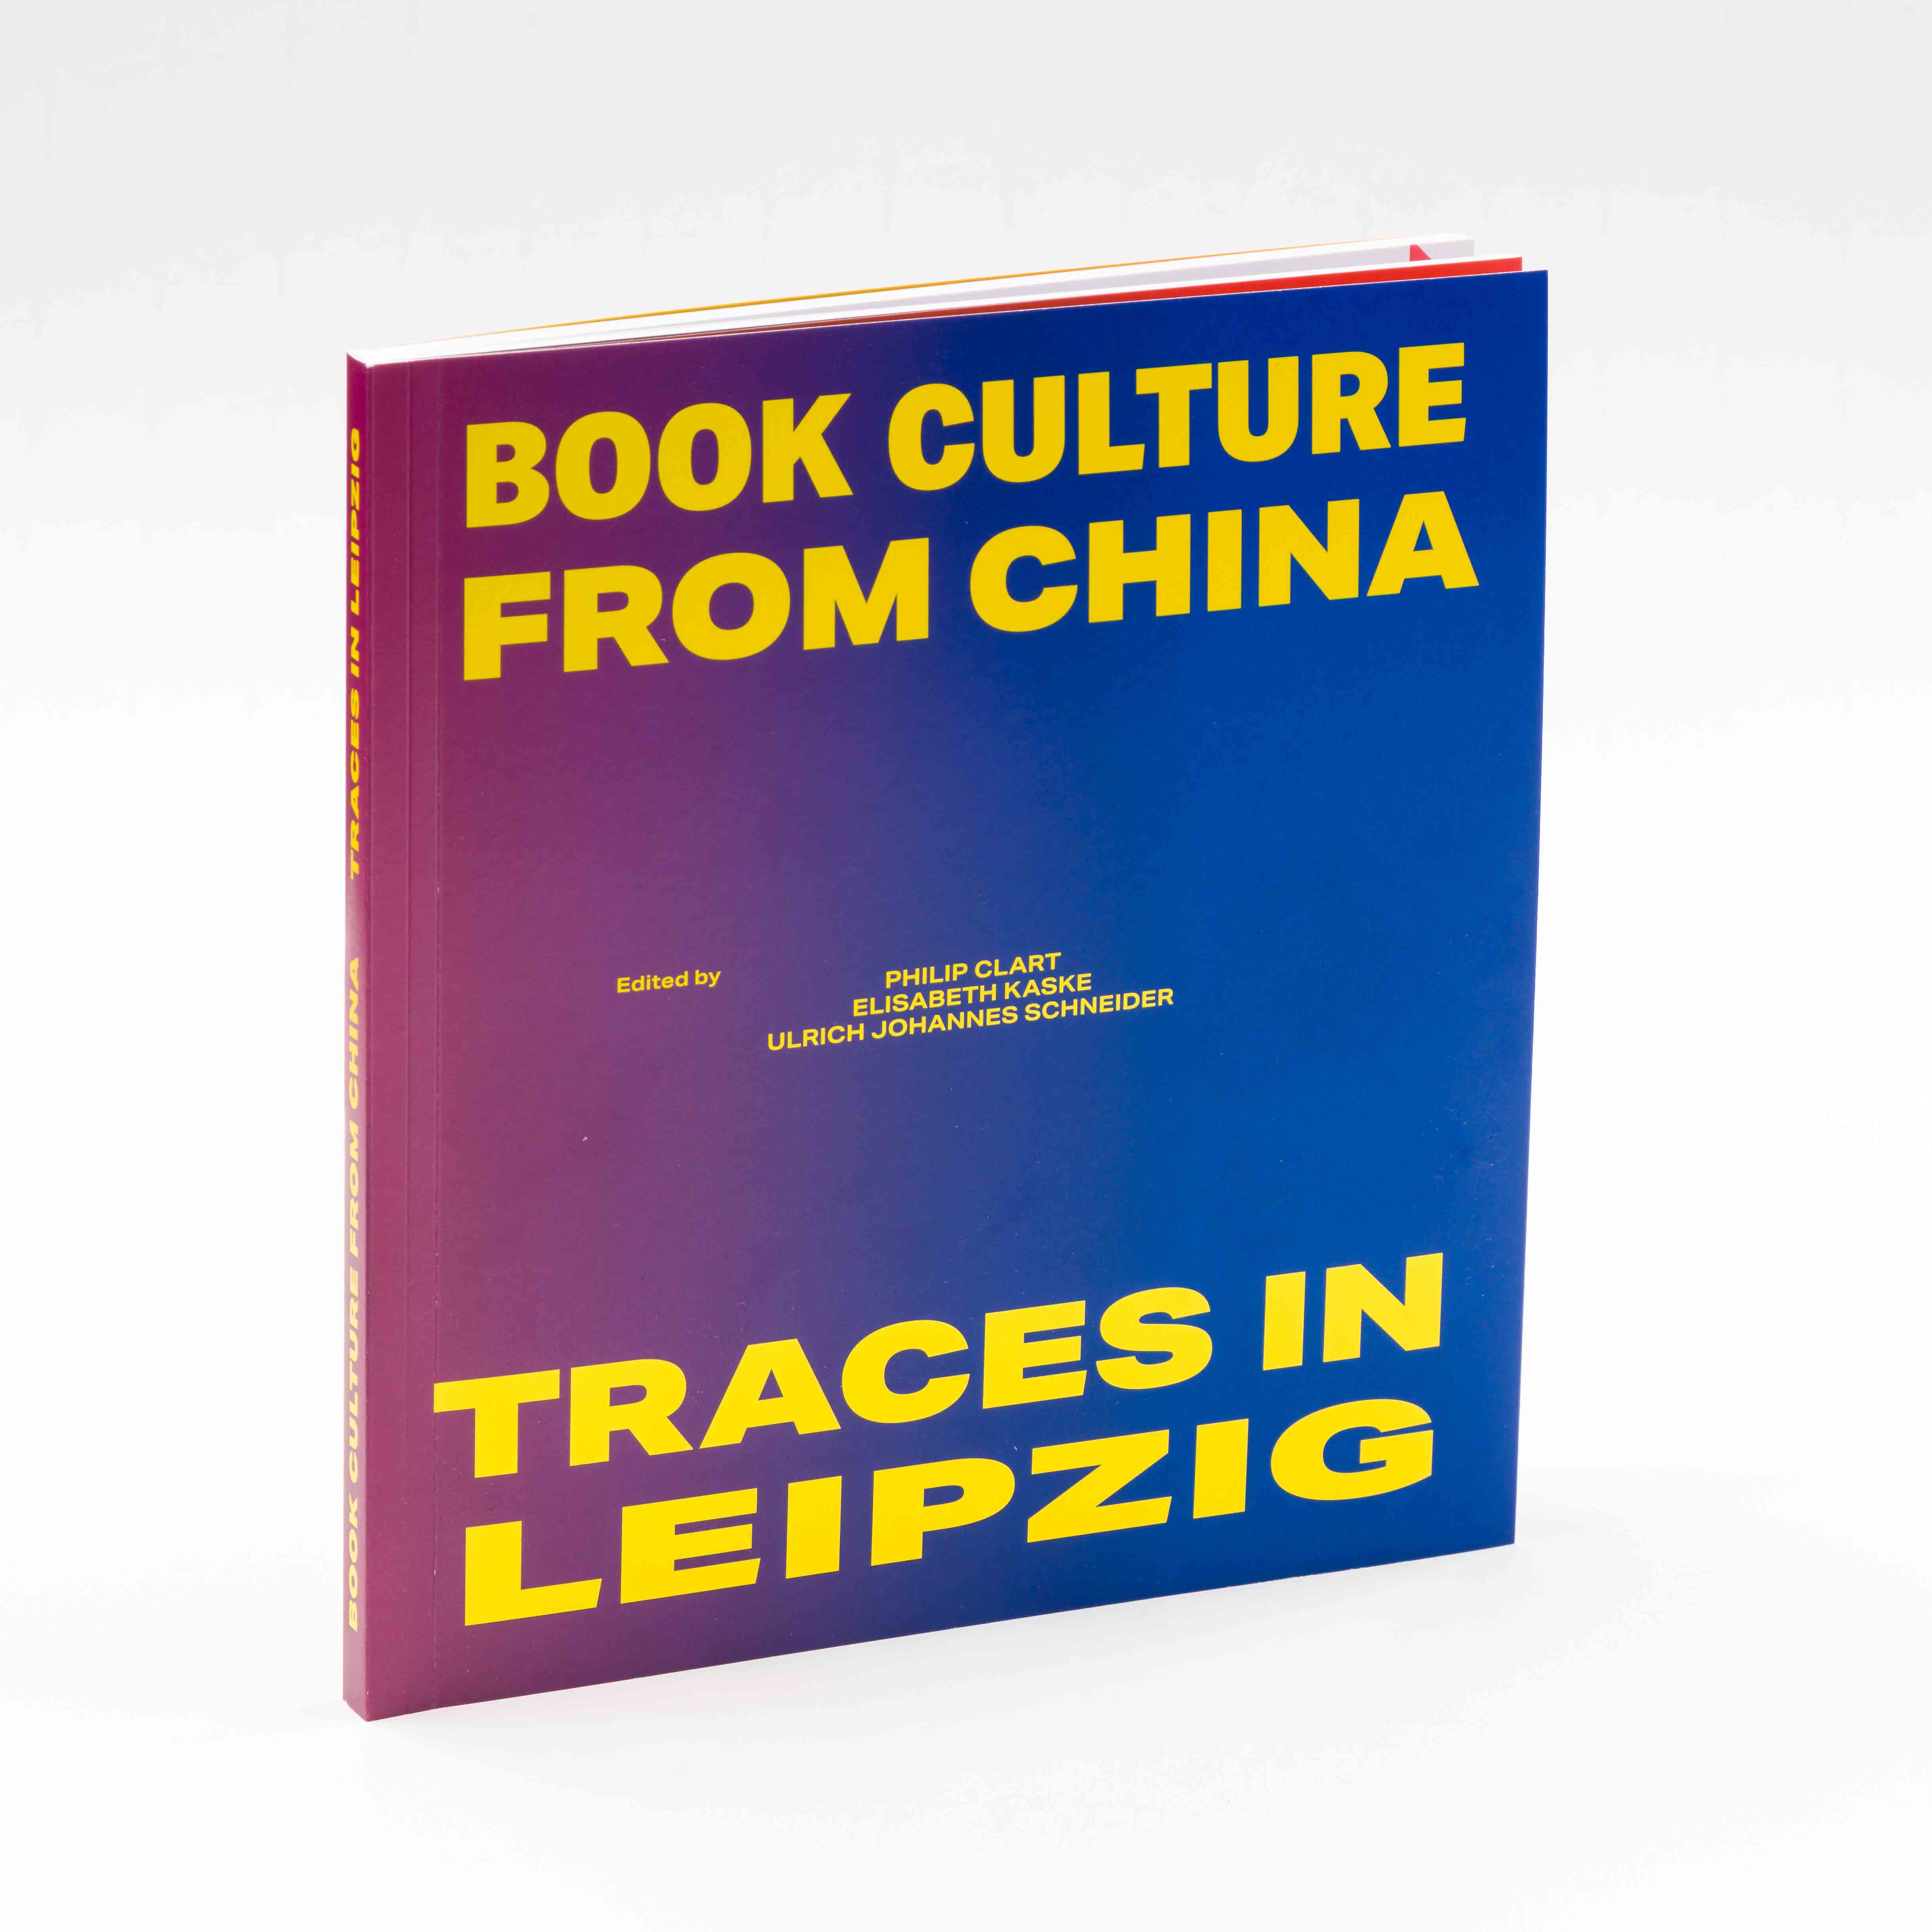 Katalogcover "Book Culture from China. Traces in Leipzig"